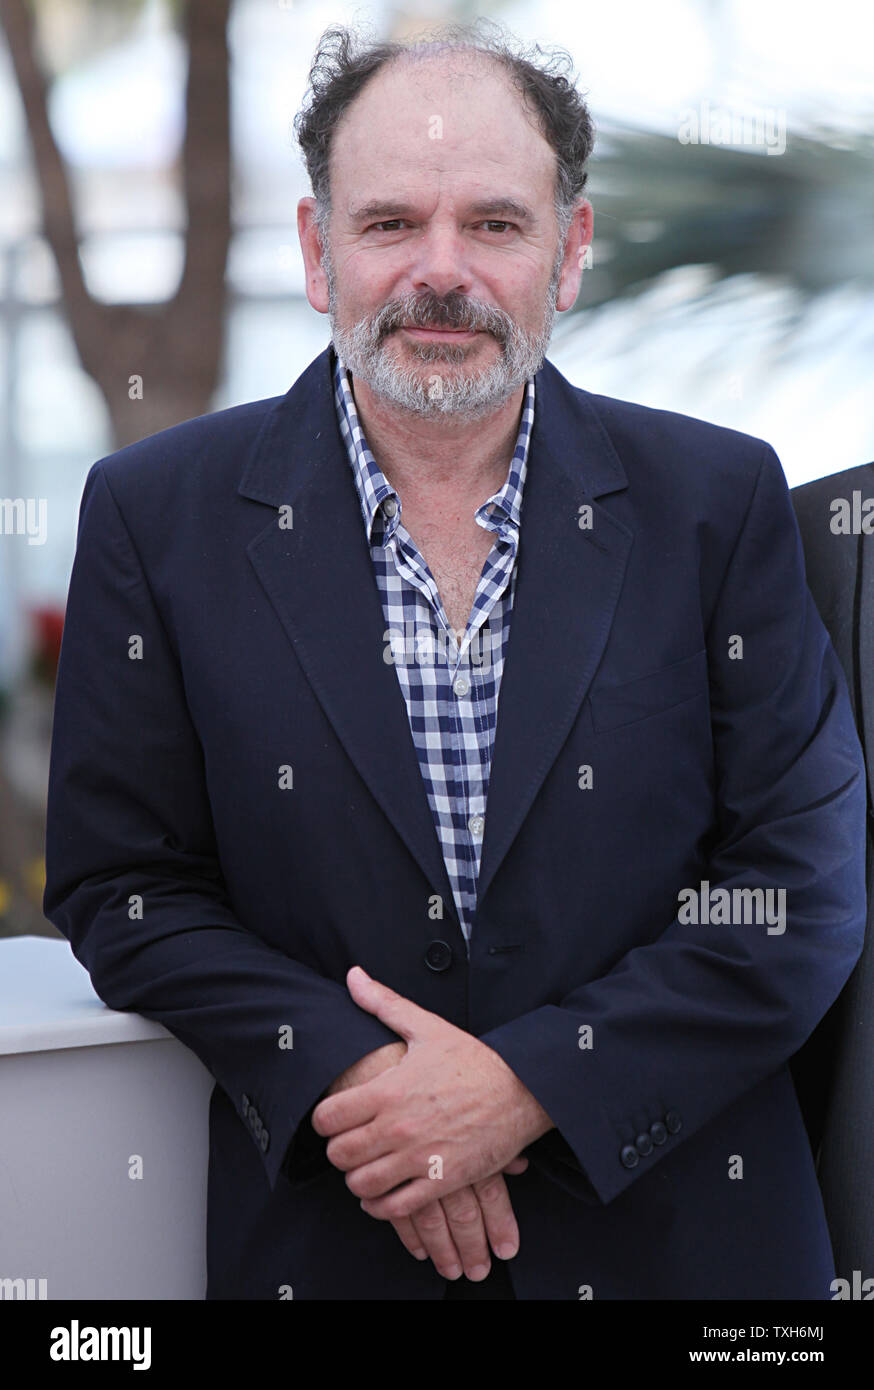 Jean-Pierre Darroussin arrives at a photocall for the film 'Le Havre' during the 64th annual Cannes International Film Festival in Cannes, France on May 17, 2011.   UPI/David Silpa Stock Photo